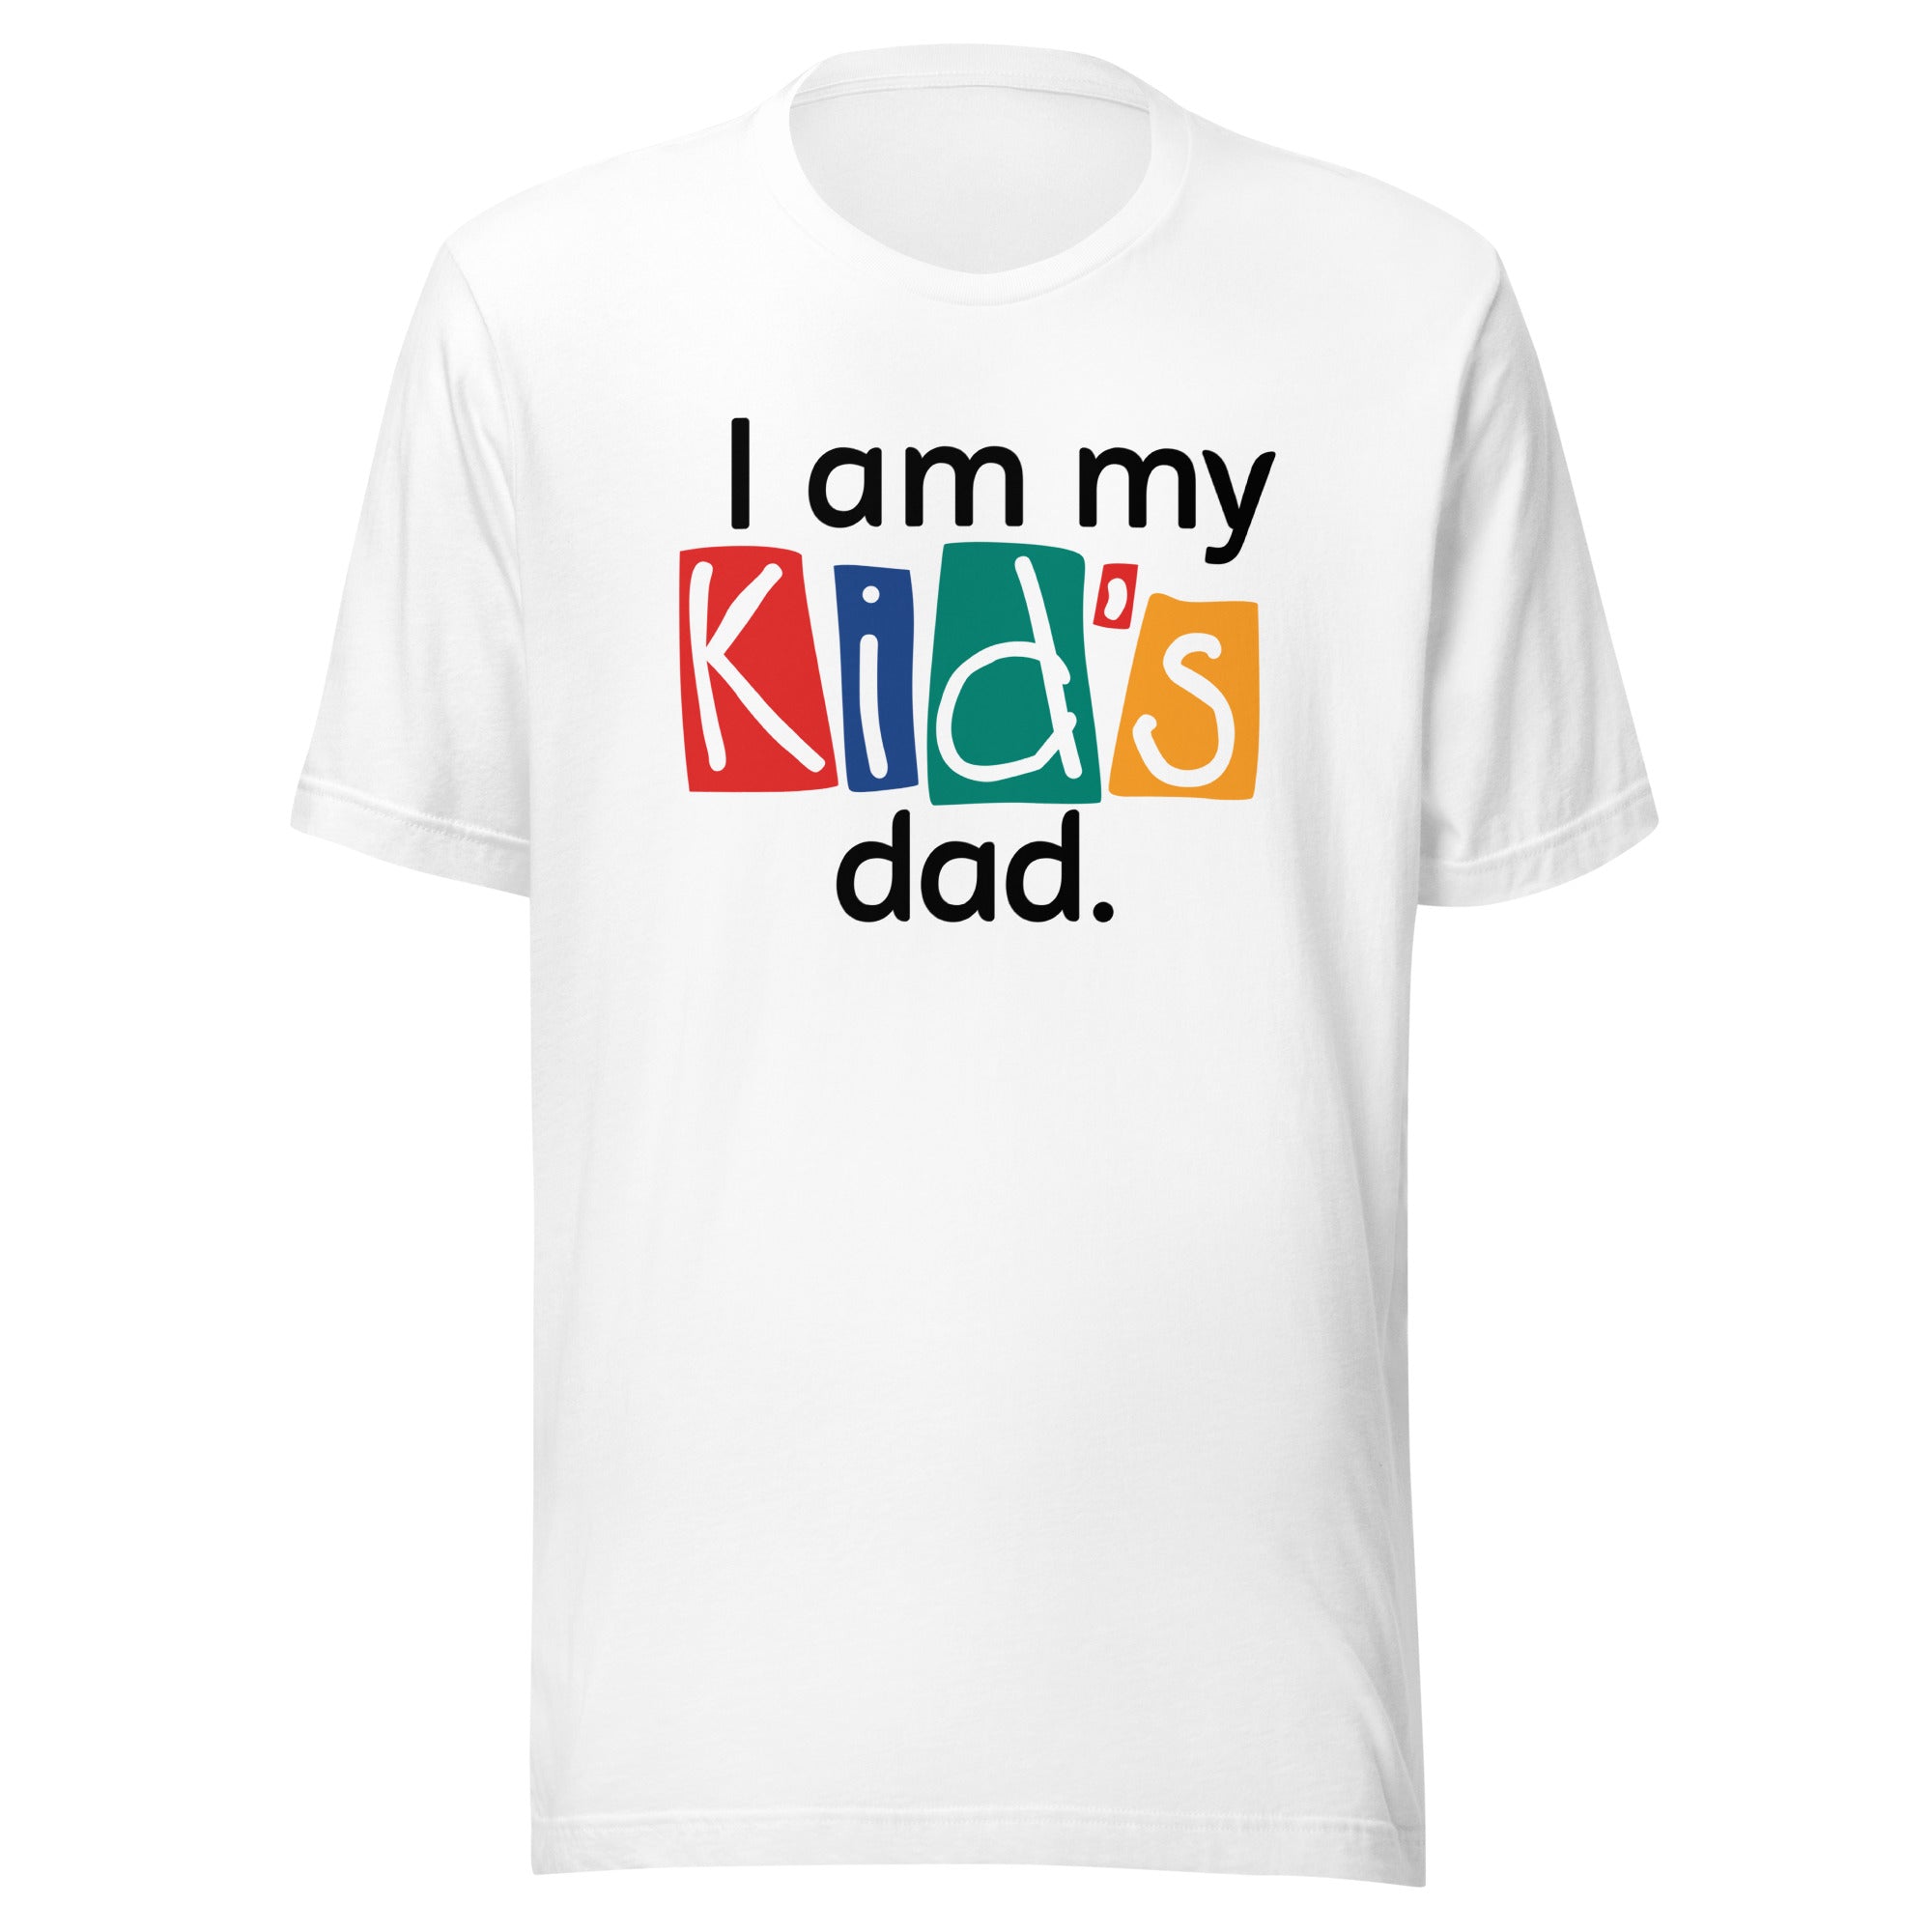 Dr. Laura: My Kid's Dad T-shirt